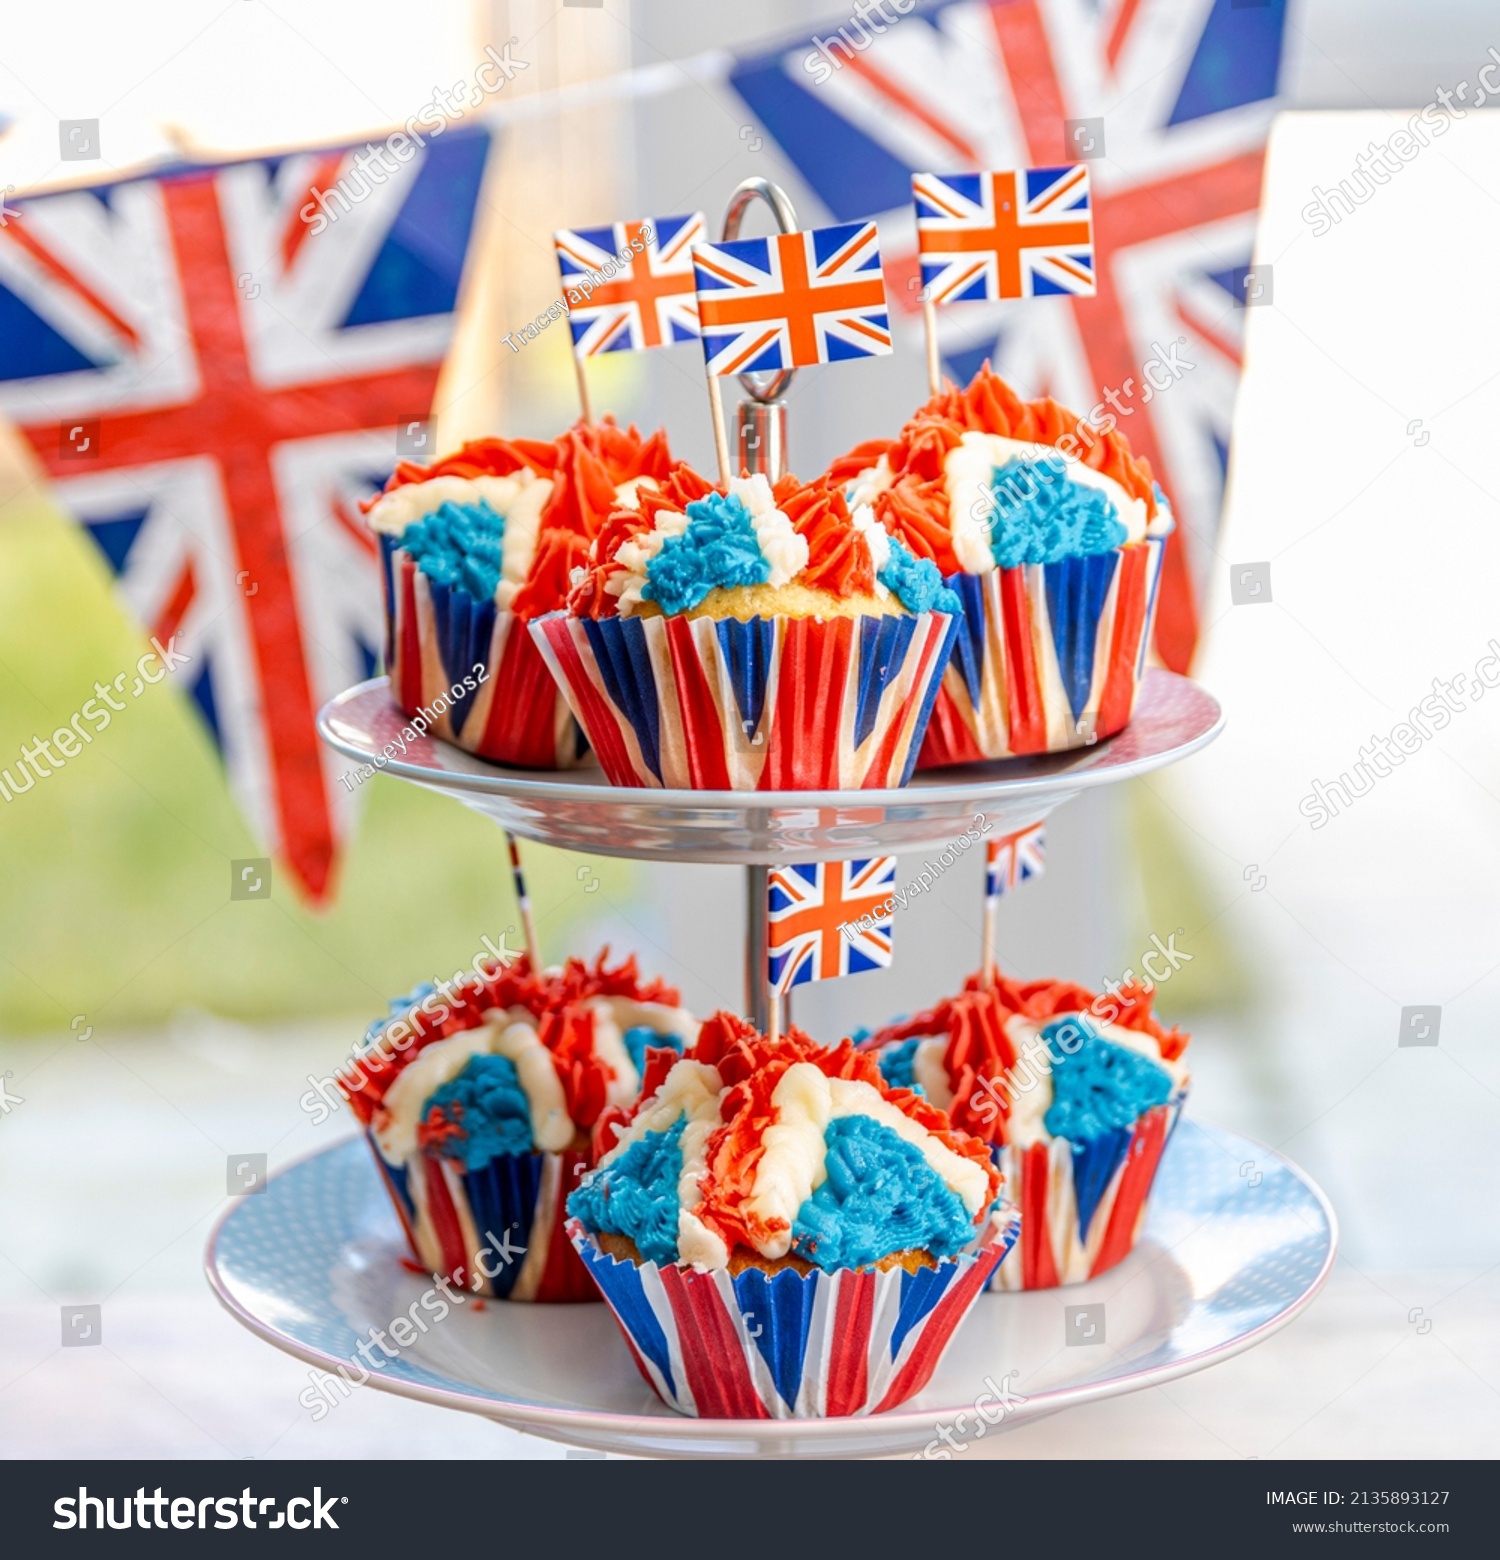 Platinum Jubilee Cupcakes in the Design of the Union Jack. Designed to celebrate the Queen's Jubilee but same image can be useful to celebrate the King Charles III's Coronation in UK  #2135893127